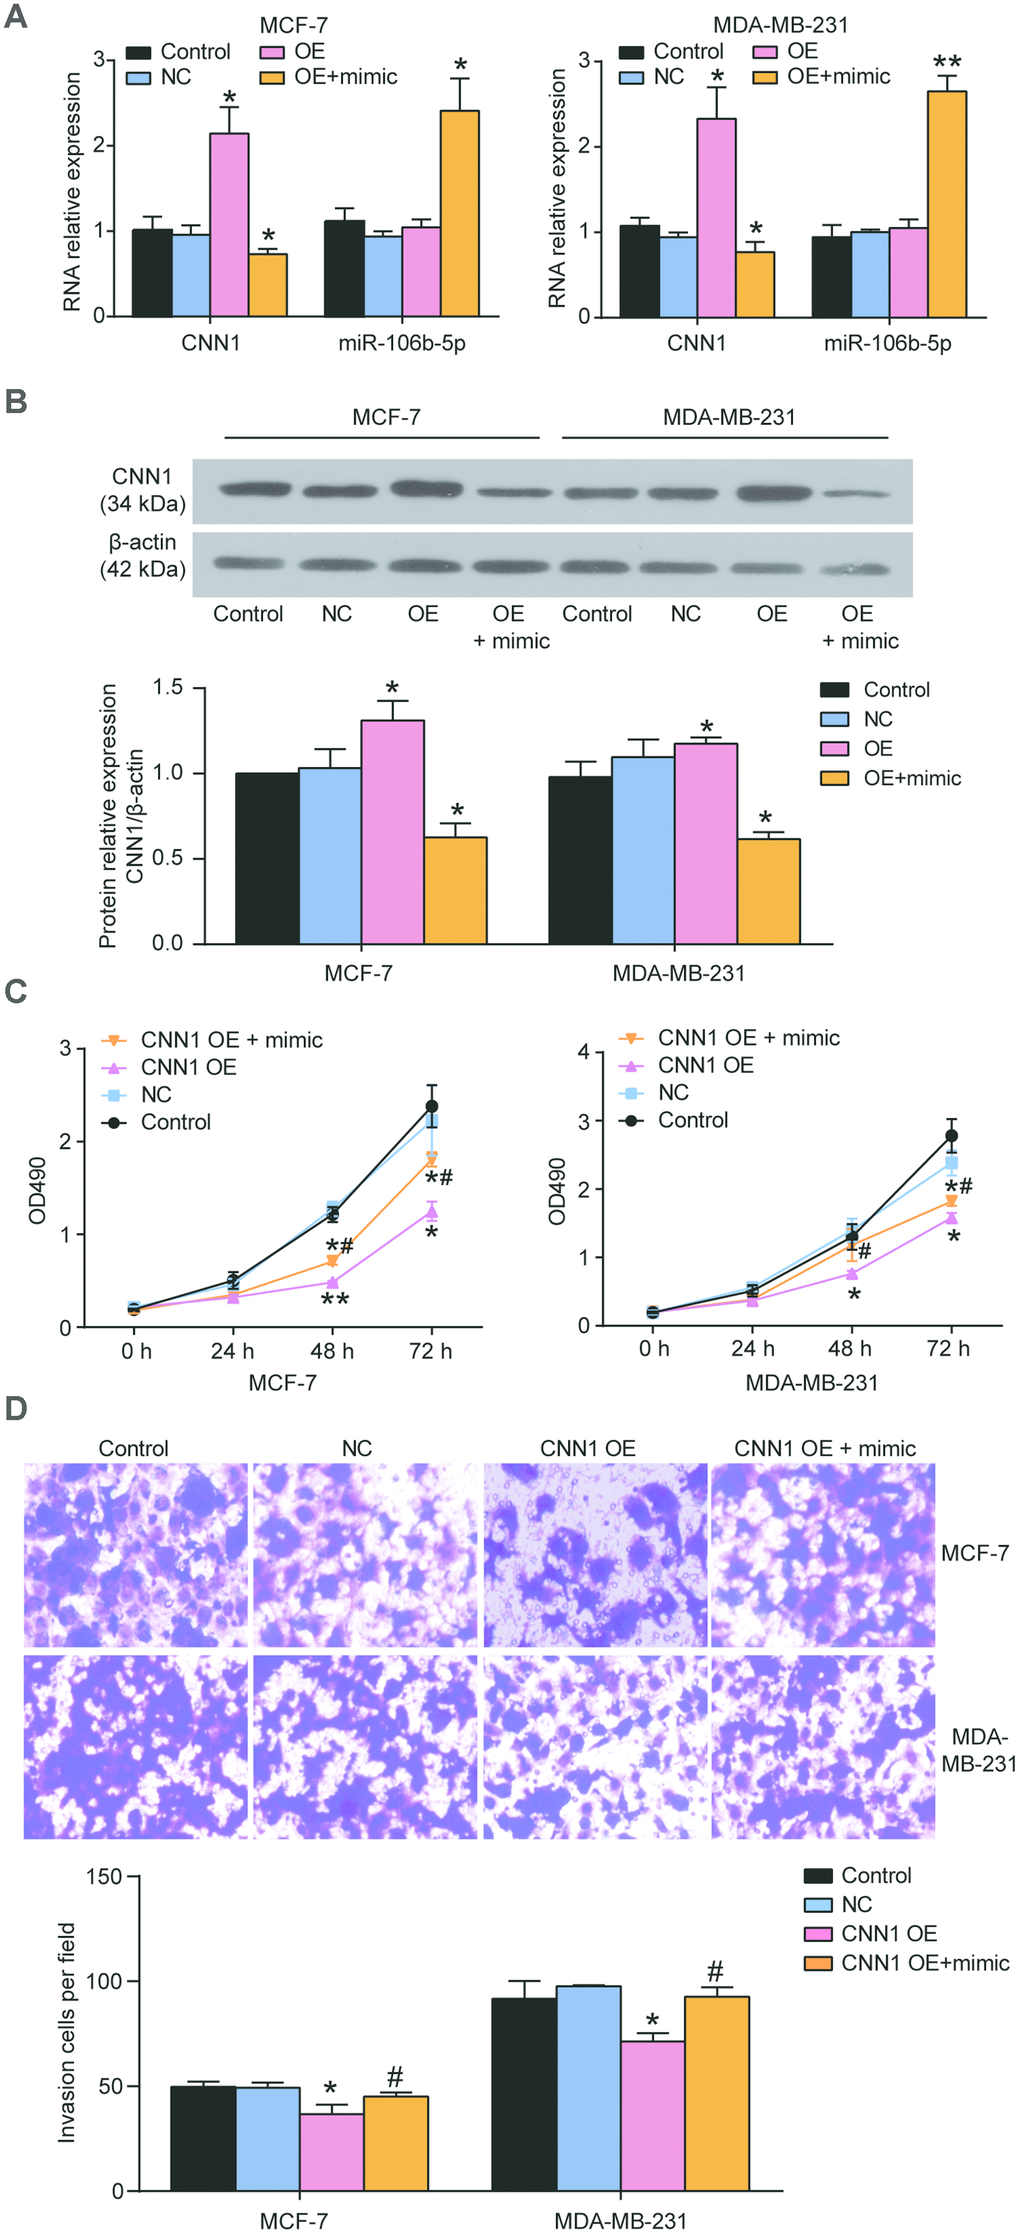 miR-106b-5p mimic alleviated the role of CNN1 overexpression induced suppression of cell proliferation and invasion. (A) Co-transfection of miR-106b-5p mimic and CNN1 overexpression led to the downregulation of CNN1 and upregulation of miR-106b-5p both in MCF-7 and MDA-MB-231 cells. (B) Co-transfection of miR-106b-5p mimic and CNN1 overexpression resulted in the decrease of the protein level of CNN1 compared with transfection of CNN1 overexpression. OE, the cells were transfected with CNN1 overexpression. OE+mimic, the cells were co-transfected with miR-106b-5p mimic and CNN1 overexpression. *PC) and (D) The co-transfection of miR-106b-5p mimic and CNN1 overexpression alleviated the inhibition of cell proliferation and invasion caused by CNN1 overexpression. The CCK8 assay and transwell assay respectively revealed the changes of cell proliferation and invasion. CNN1 OE, the cells were transfected with CNN1 overexpression. CNN1 OE+mimic, the cells were co-transfected with miR-106b-5p mimic and CNN1 overexpression. *P